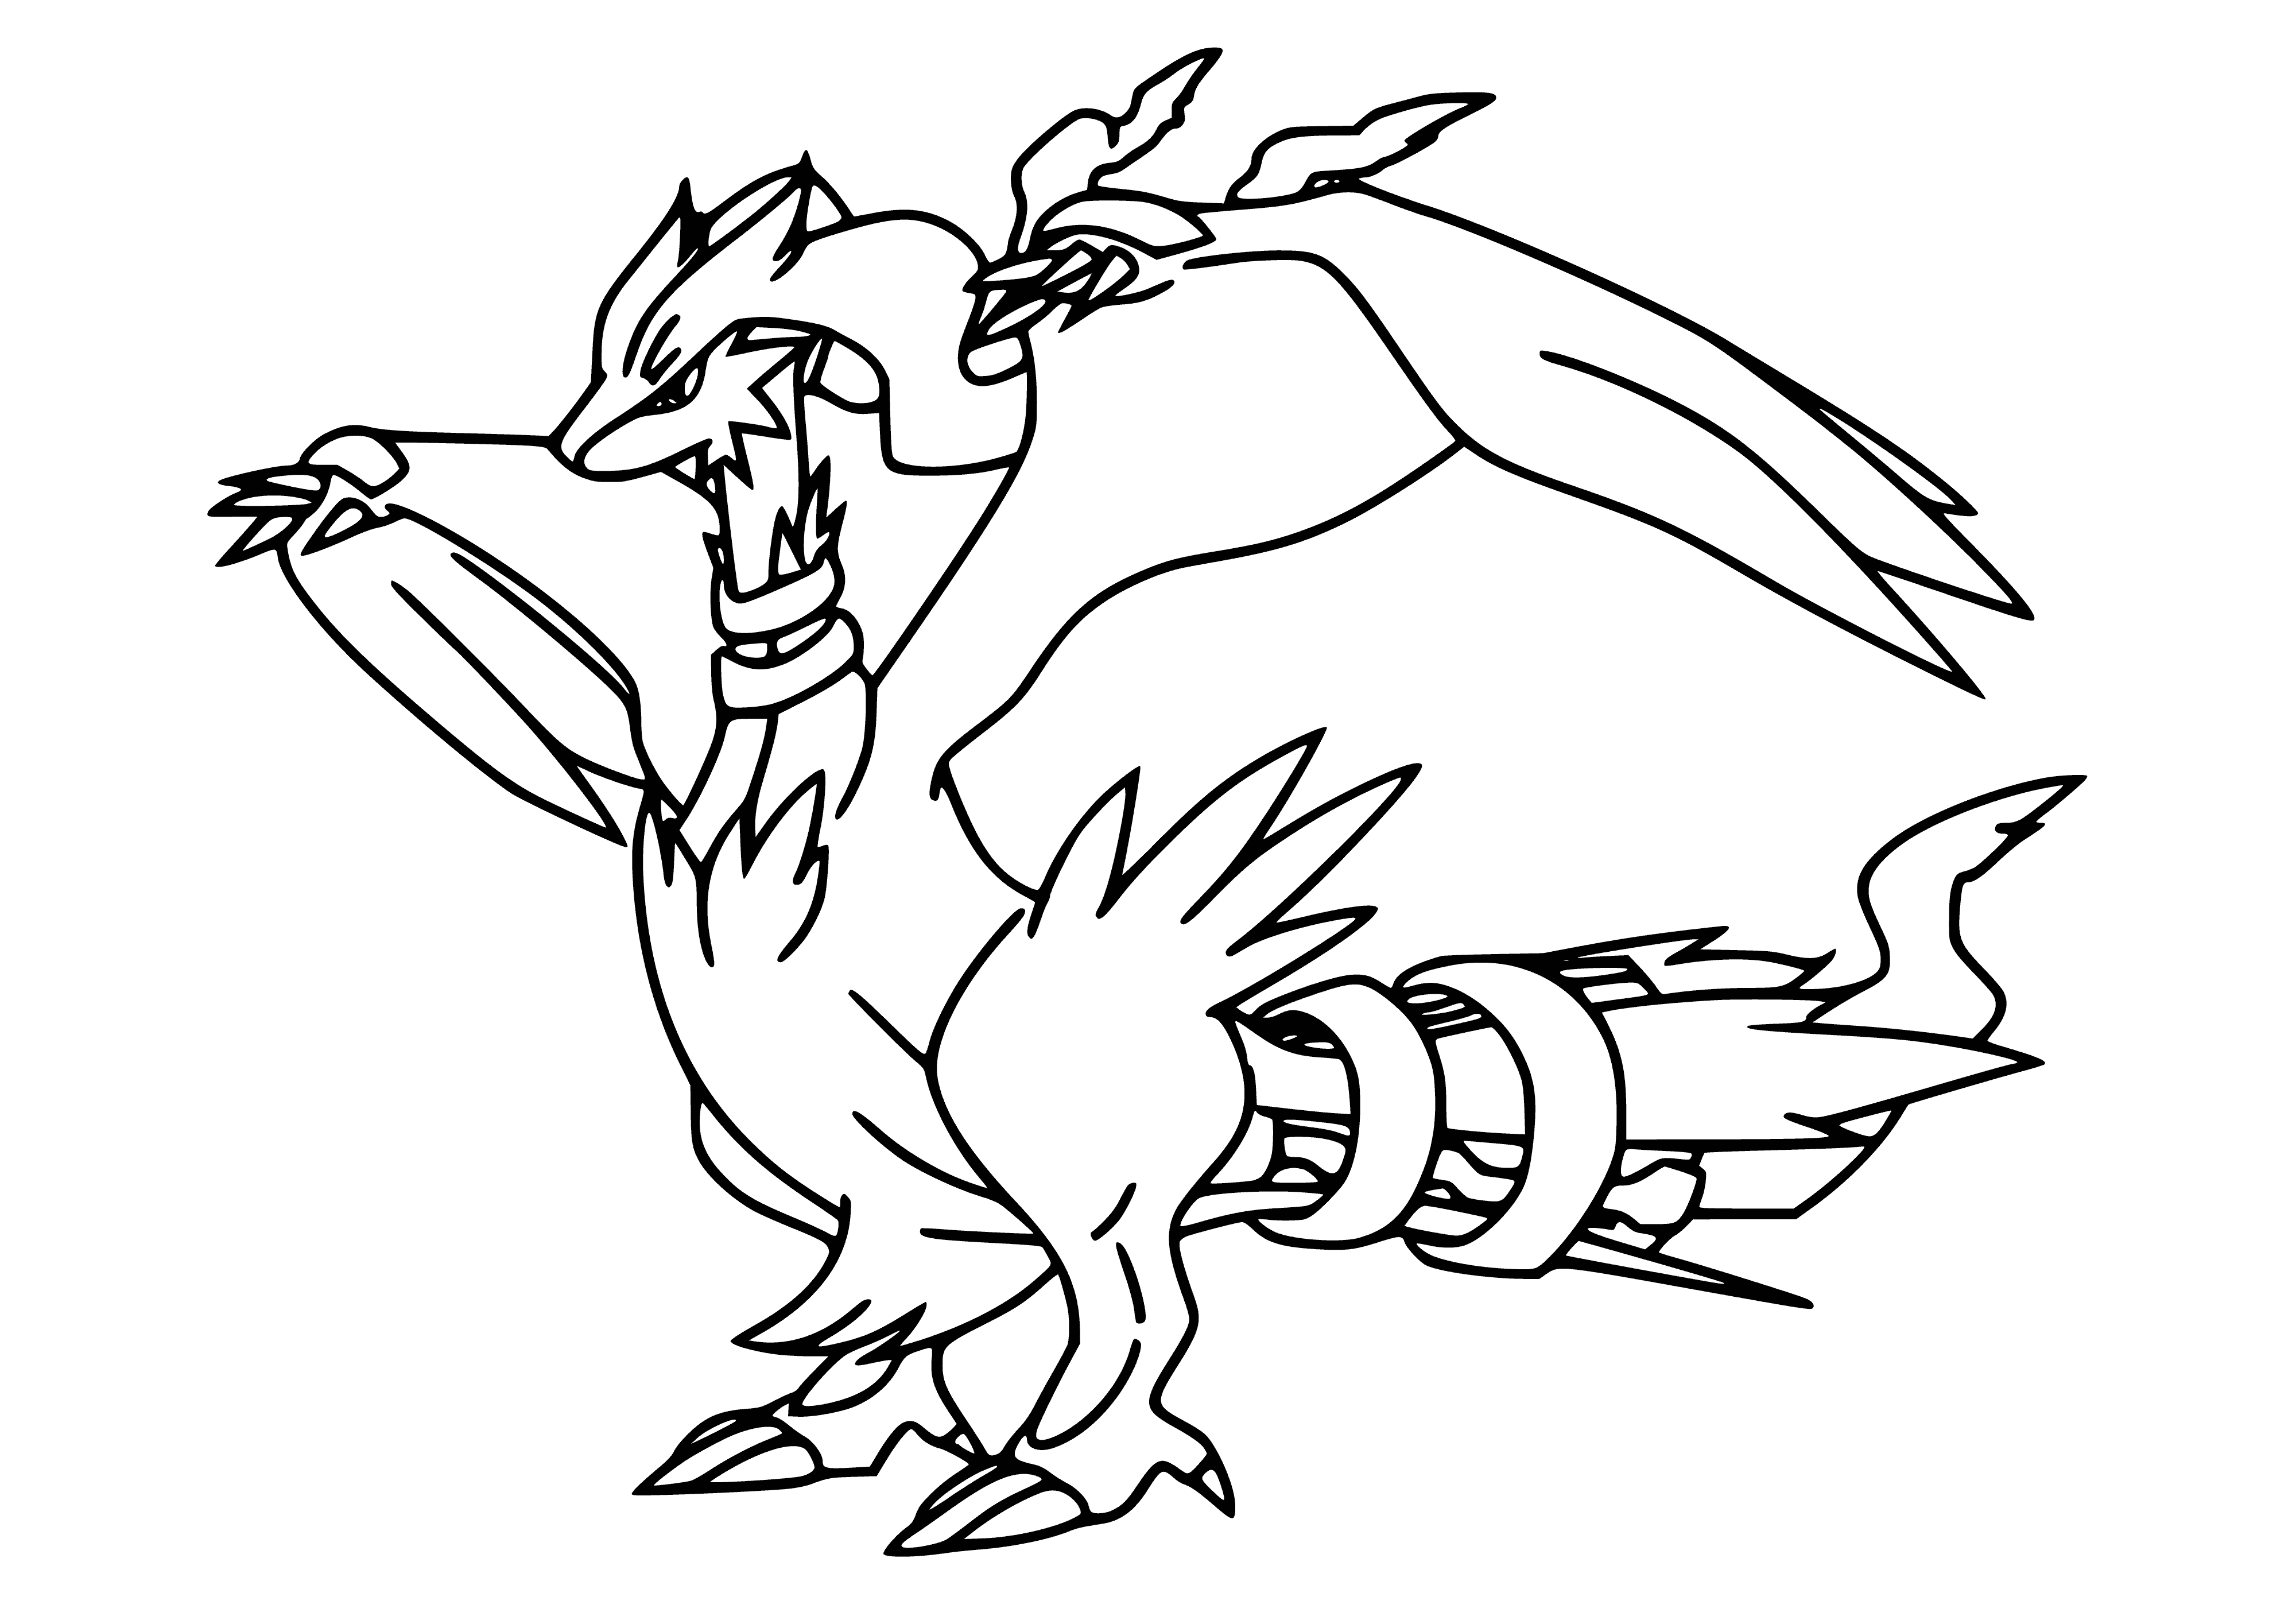 coloring page: #Pokemon

A dragon-like white Pokemon with blue eyes & spikes, Reshiram has a long neck, small head, & large wings. #Pokemon